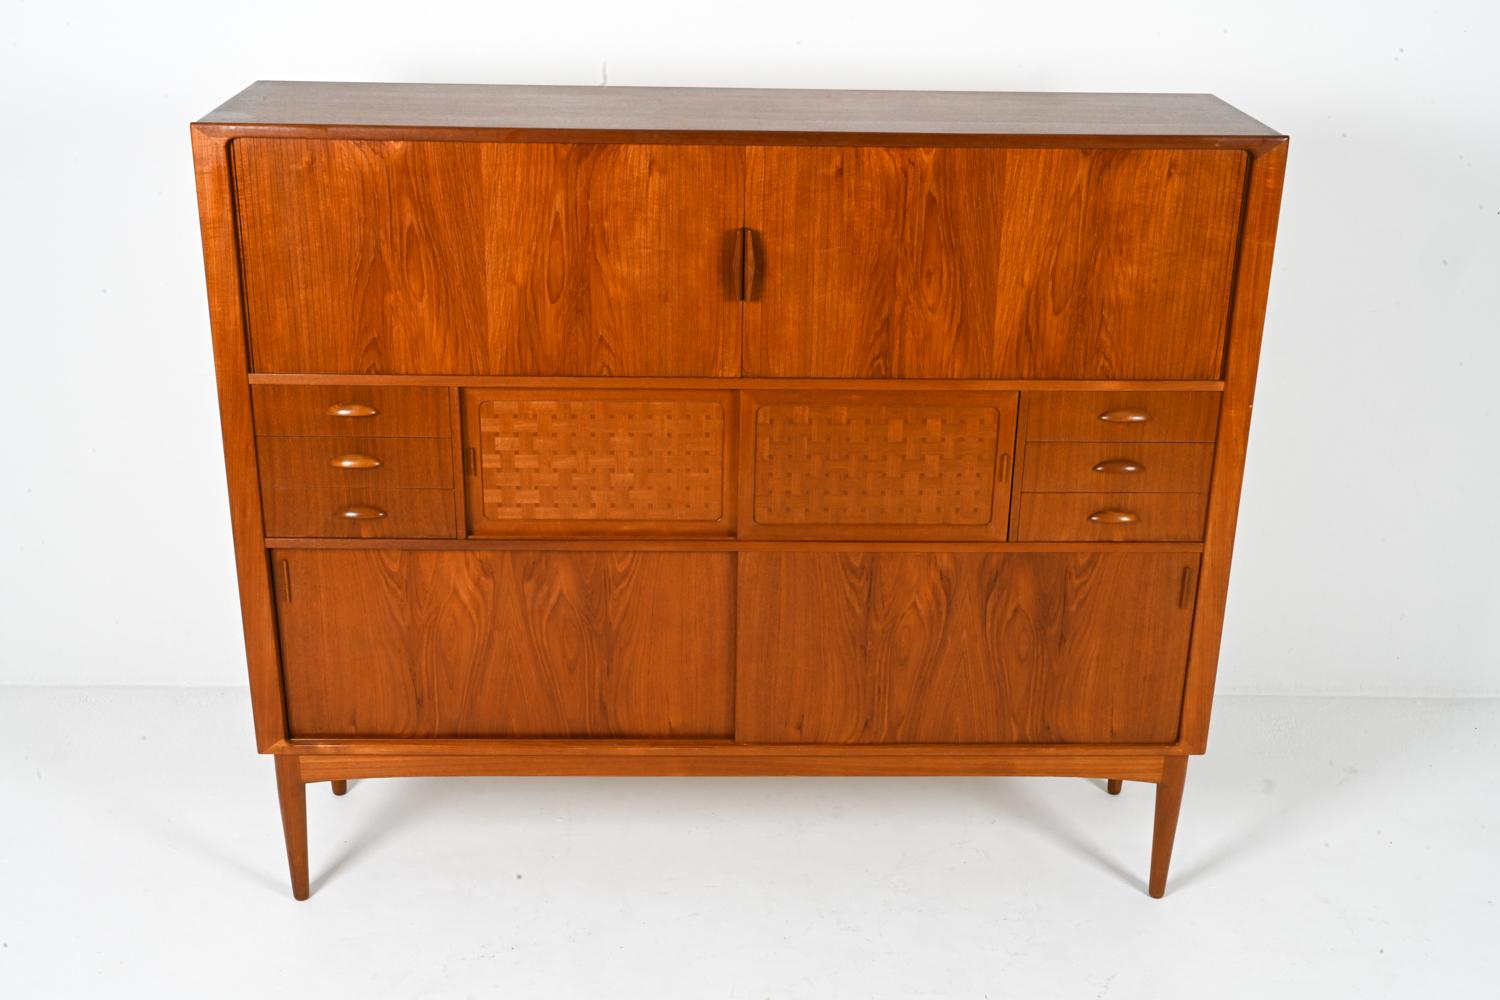 This exceptional sideboard embodies the pinnacle of Danish design, a masterpiece crafted by renowned furniture maker Johannes Andersen in the Mid-Century Modern era. Constructed from rich, teak wood, it showcases the exquisite form, exceptional